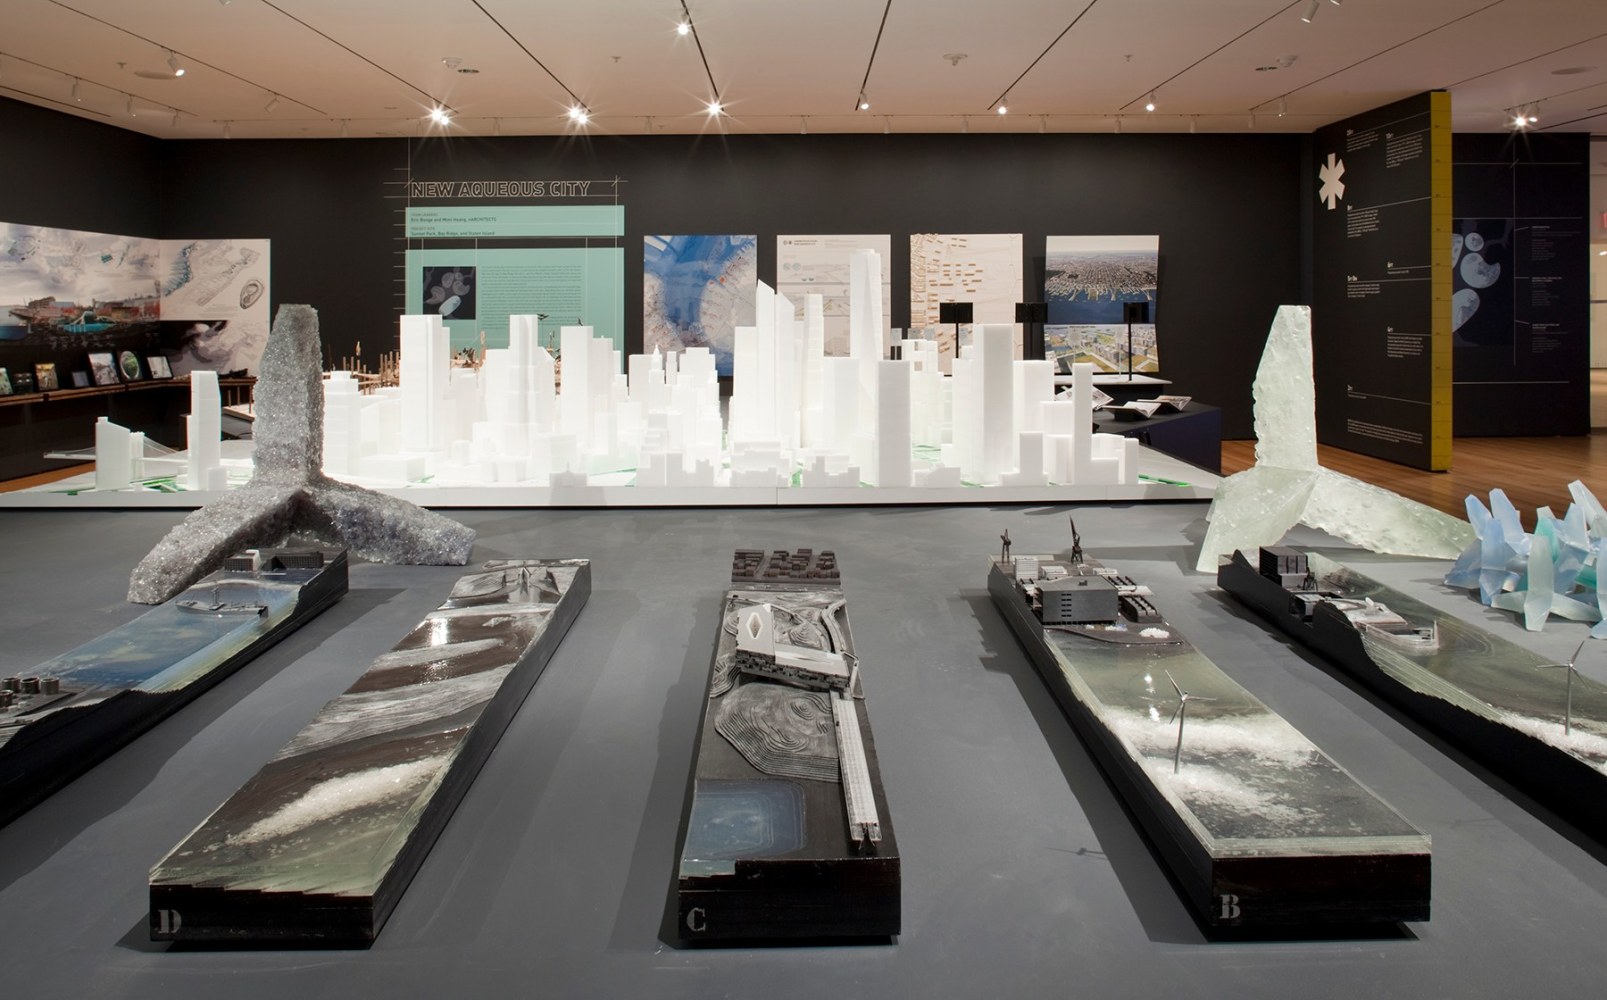 MoMA Rising Currents Exhibition,&amp;nbsp;New York, New York.&amp;nbsp;Image Credit: &amp;copy; 2010 The Museum of Modern Art, New York, Photo: Thomas Griesel, &amp;copy; Matthew Baird Architects.